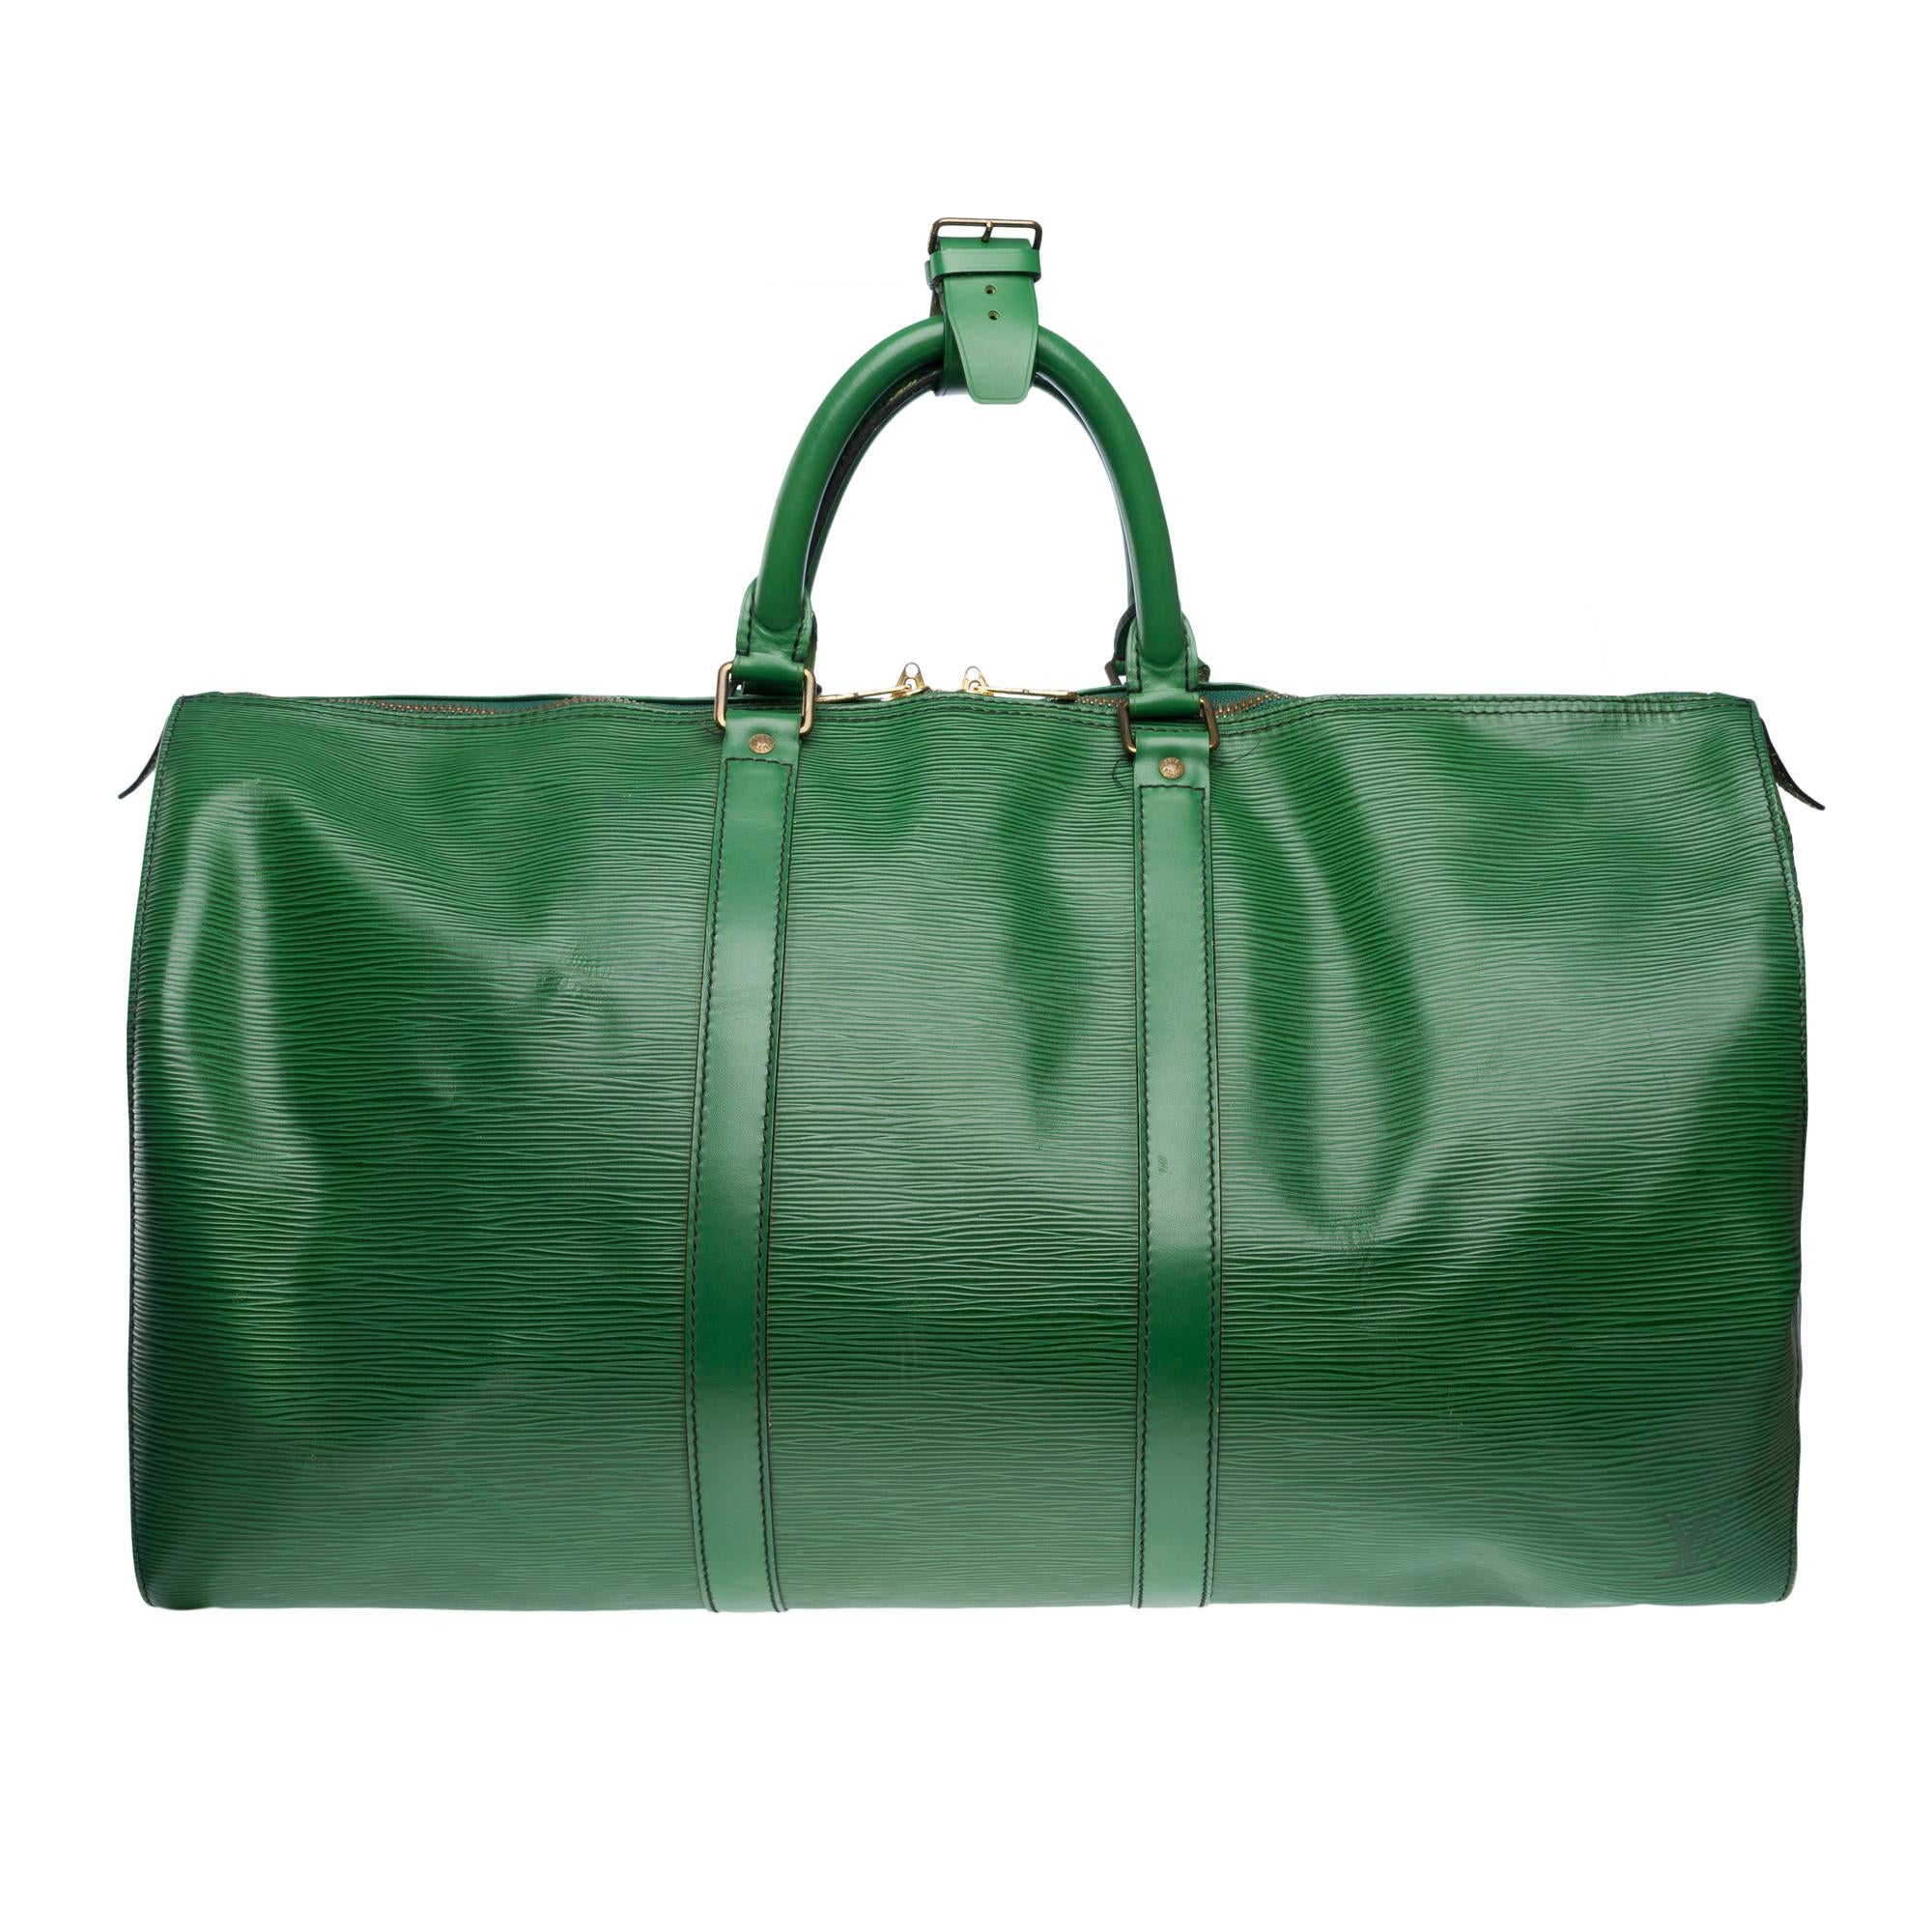 Louis Vuitton Keepall 50 Travel bag in Green épi leather, GHW In Good Condition In Paris, IDF